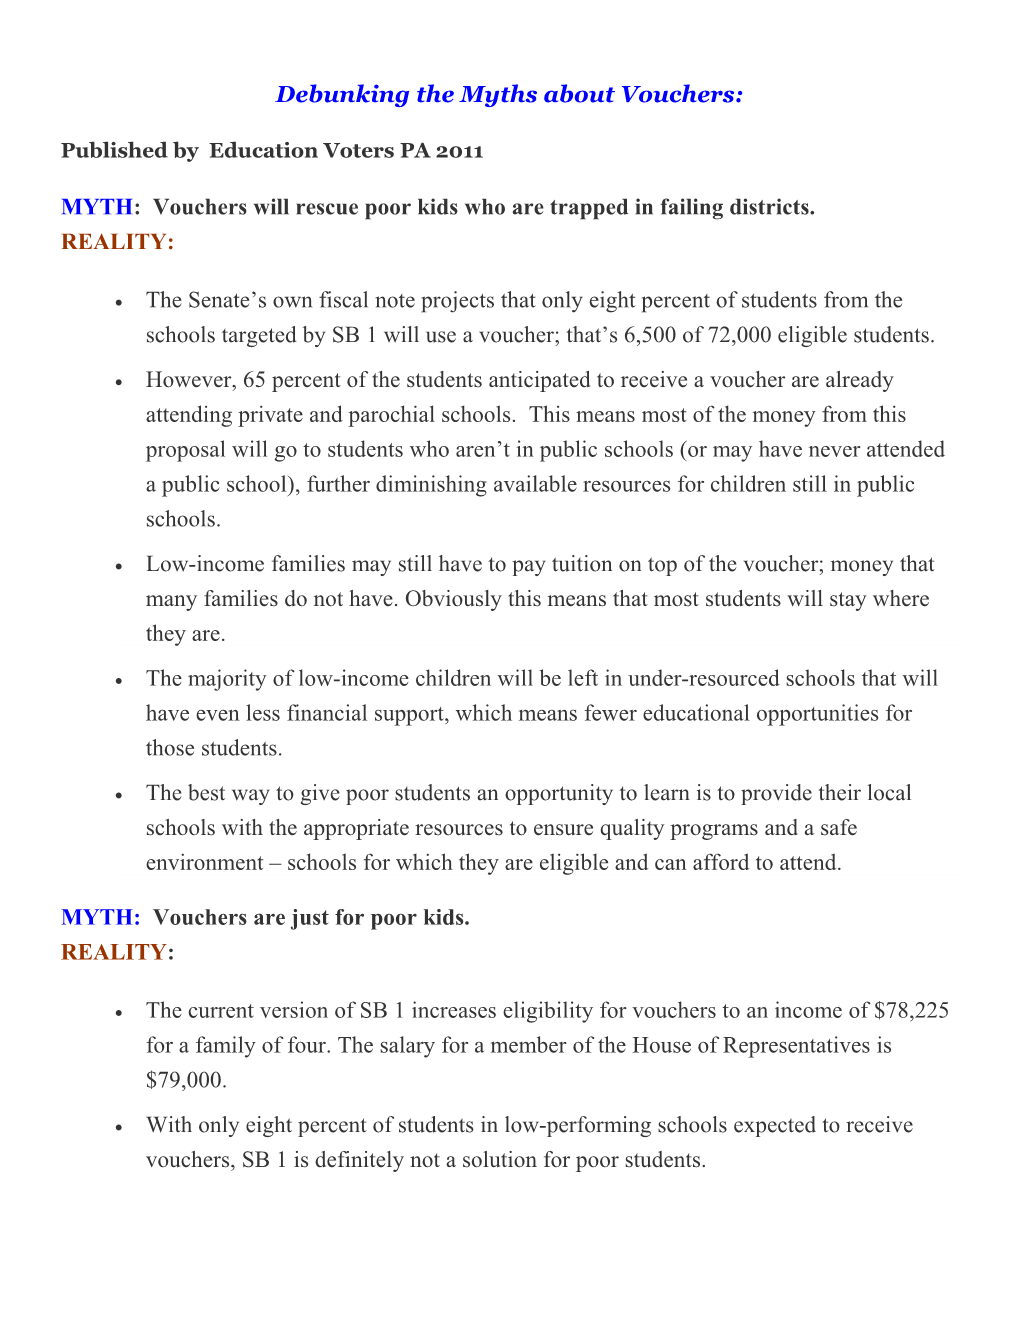 Debunking the Myths About Vouchers